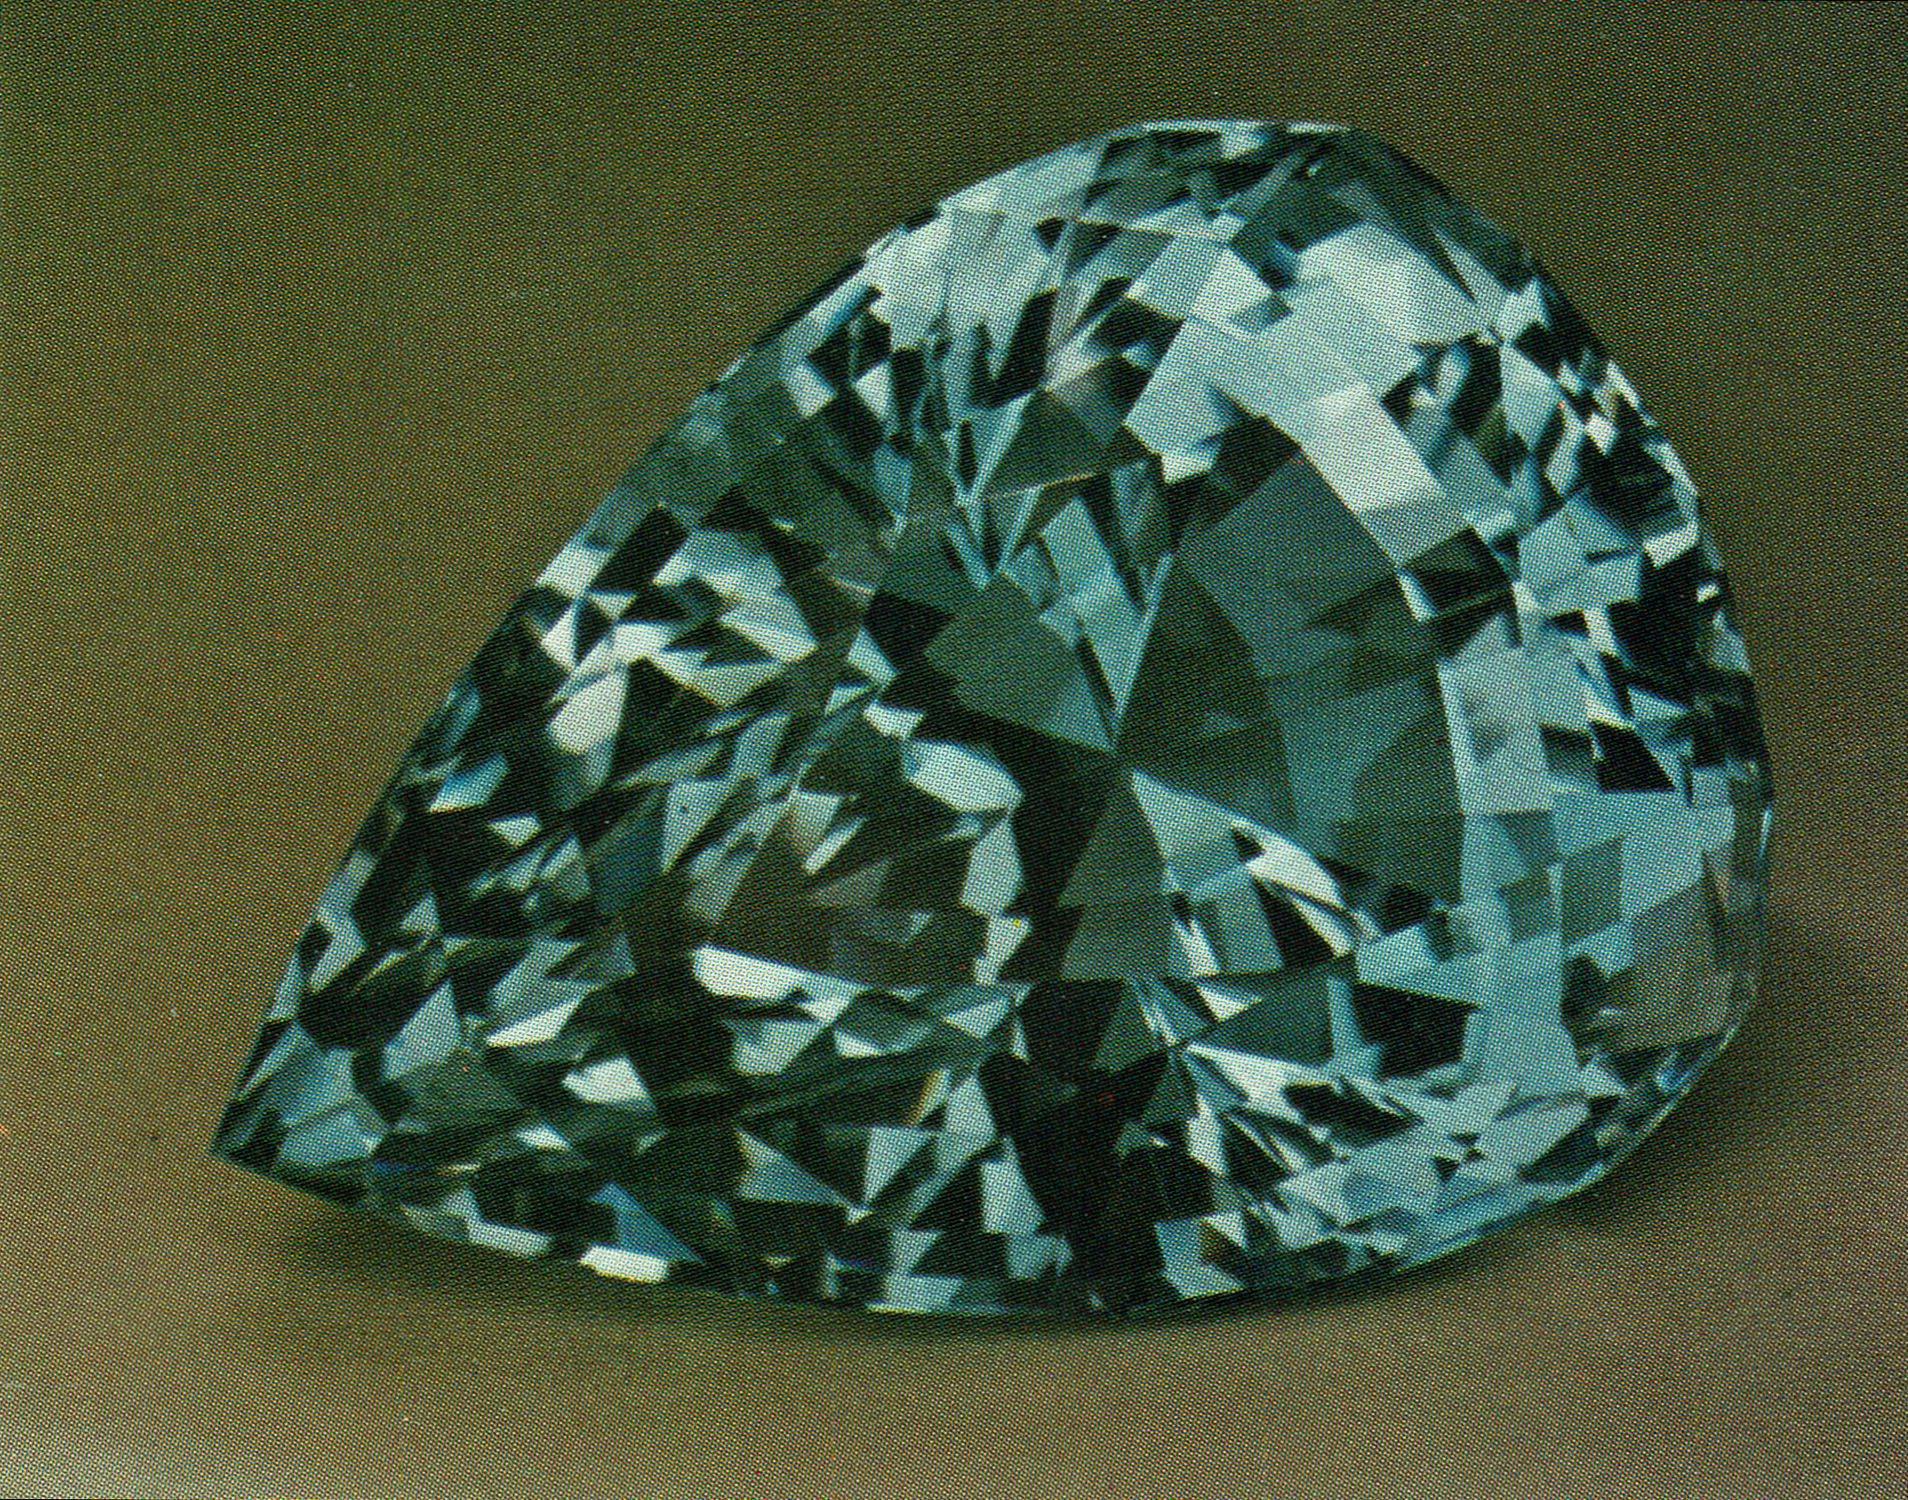 heated and irradiated blue topaz